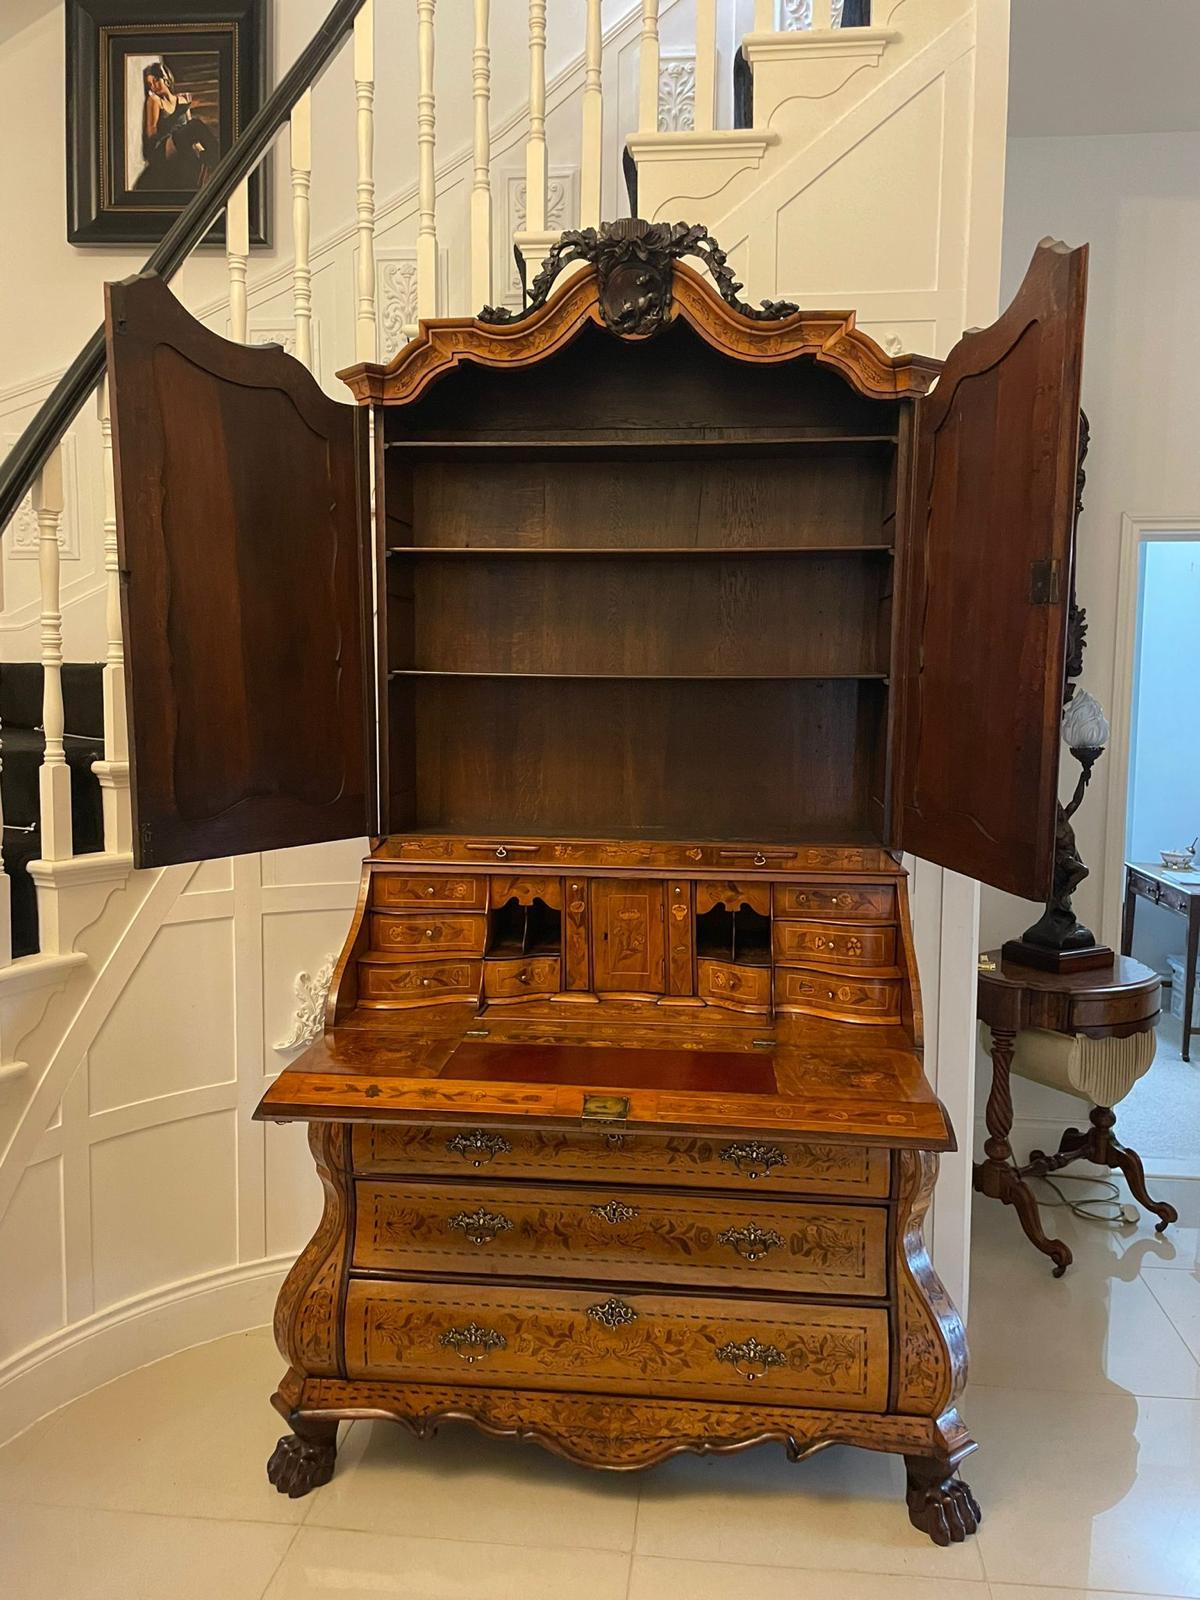 Outstanding quality 18th century antique Dutch marquetry inlaid burr walnut bureau bookcase having an outstanding quality Dutch marquetry inlaid burr walnut bureau bookcase with a beautiful carved shaped cornice above a pair of marquetry inlaid